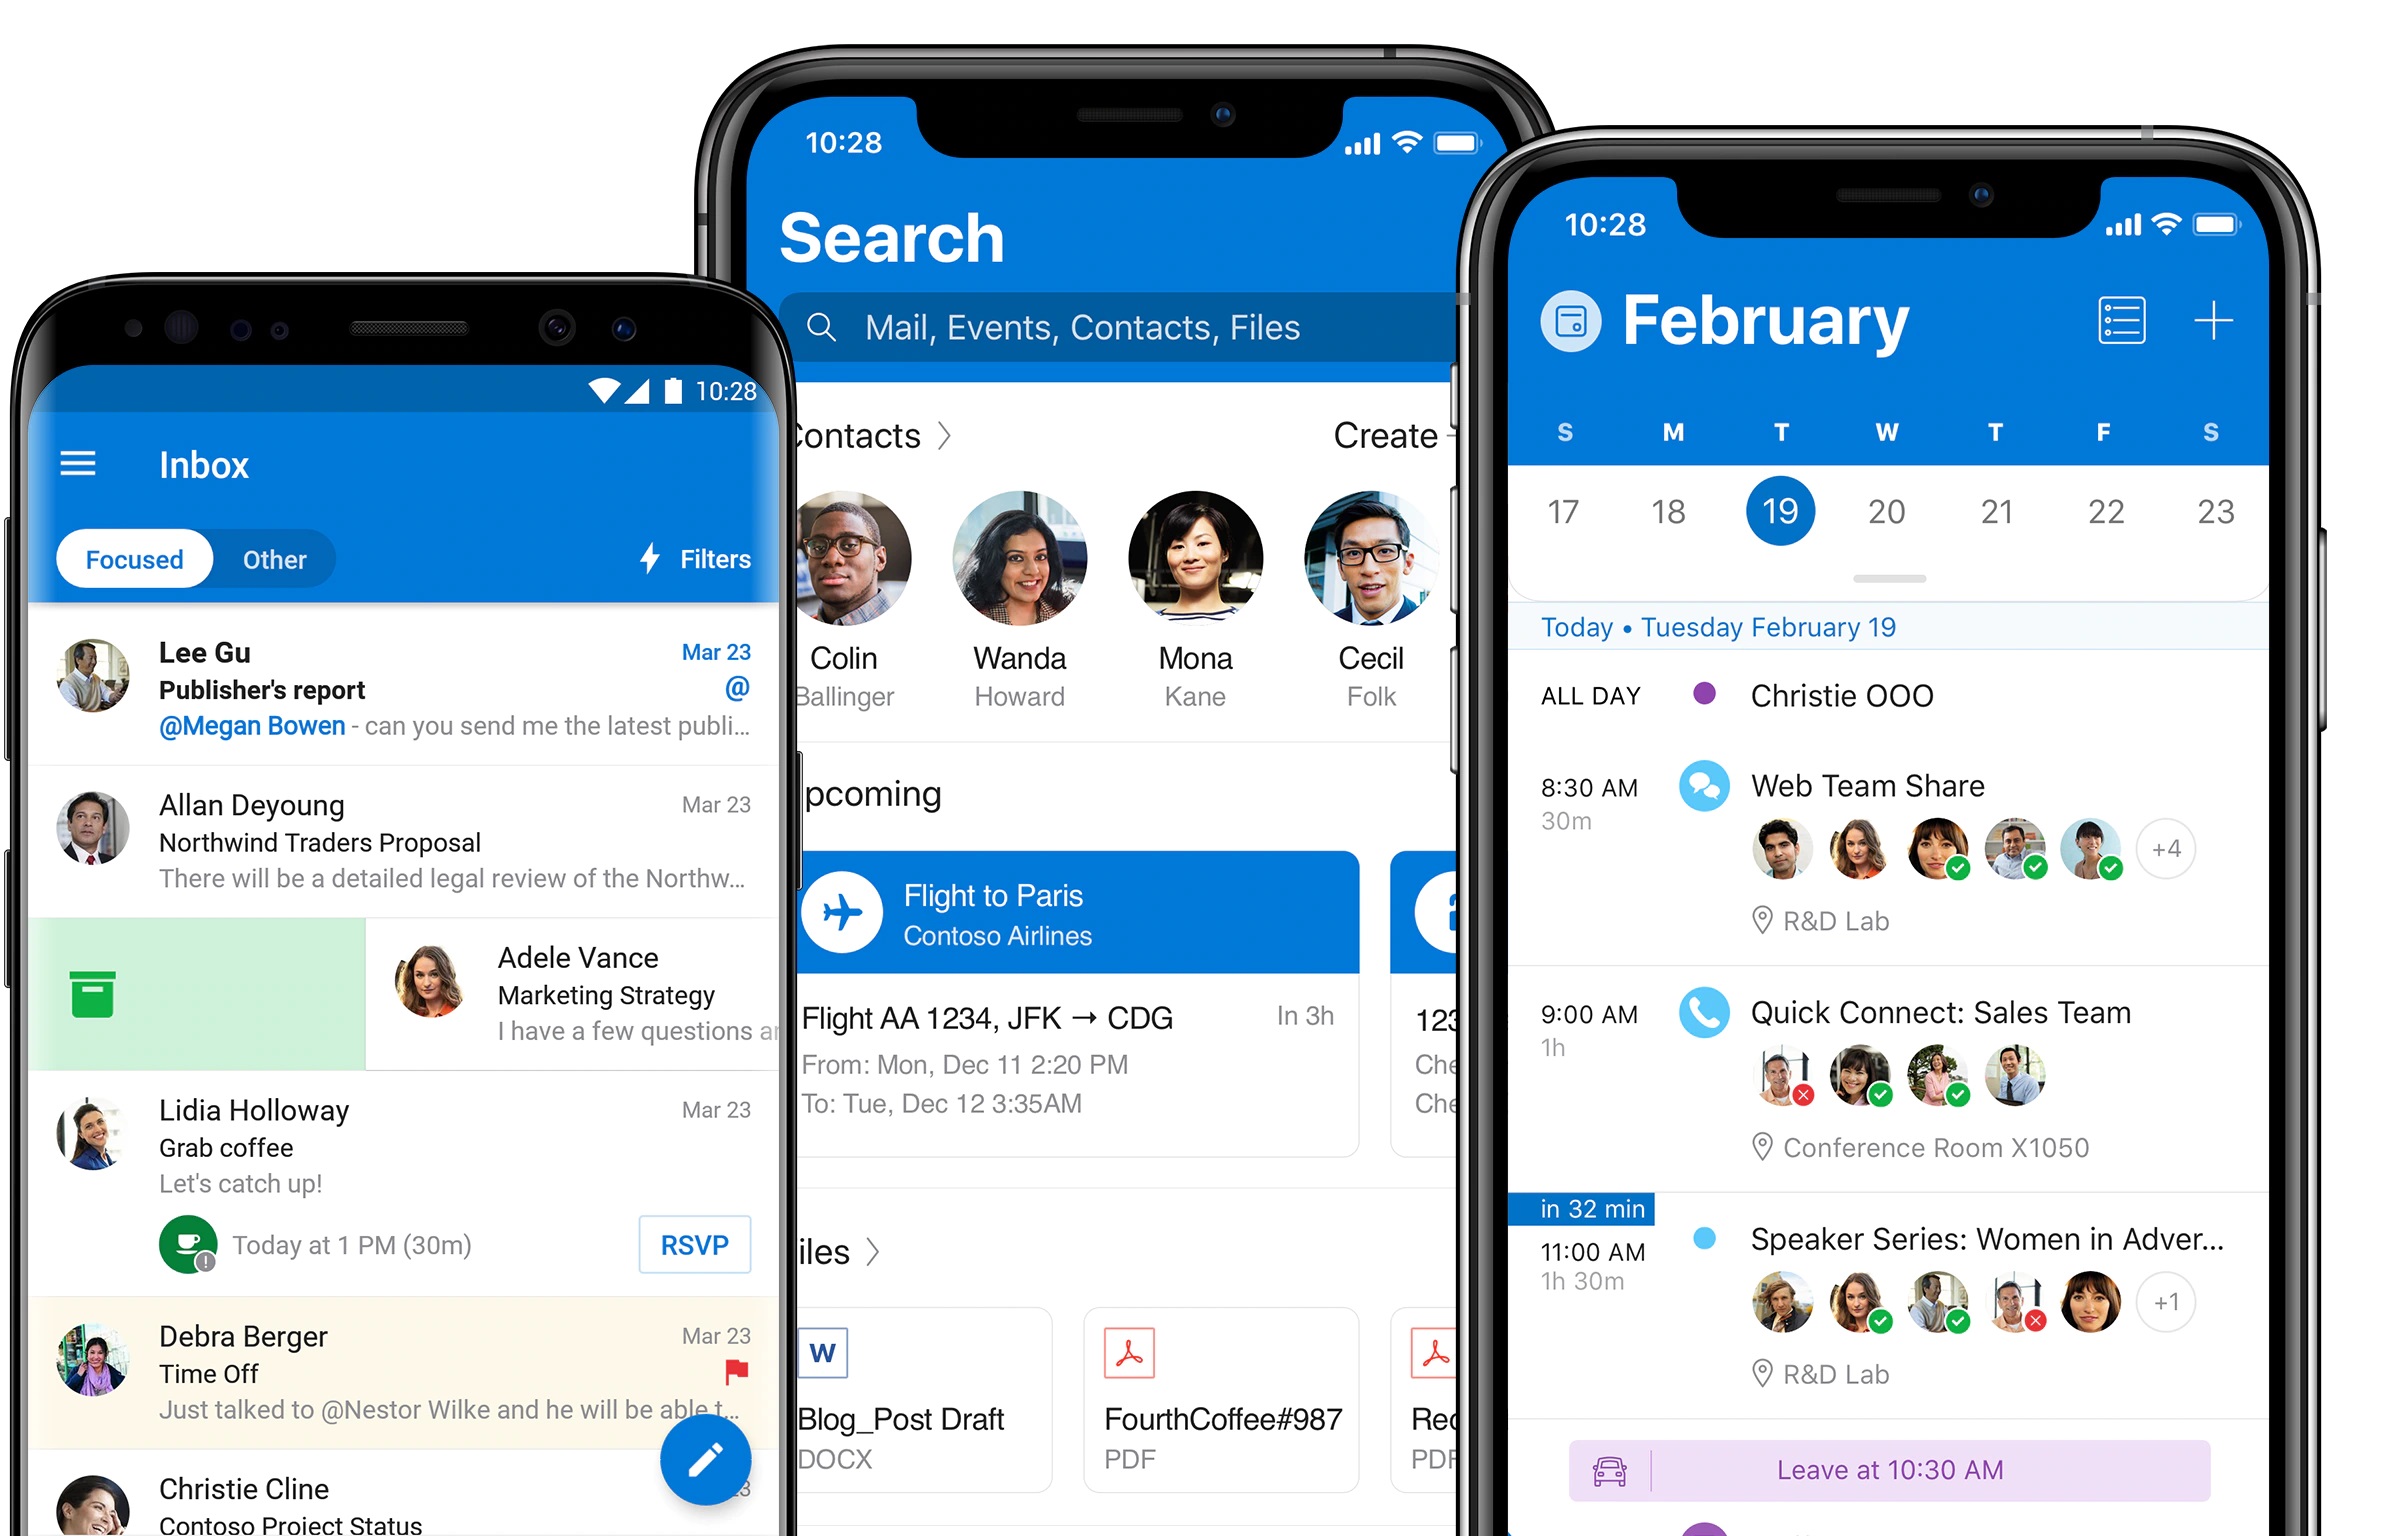 Microsoft Outlook to Only Support the Two Latest iOS Versions